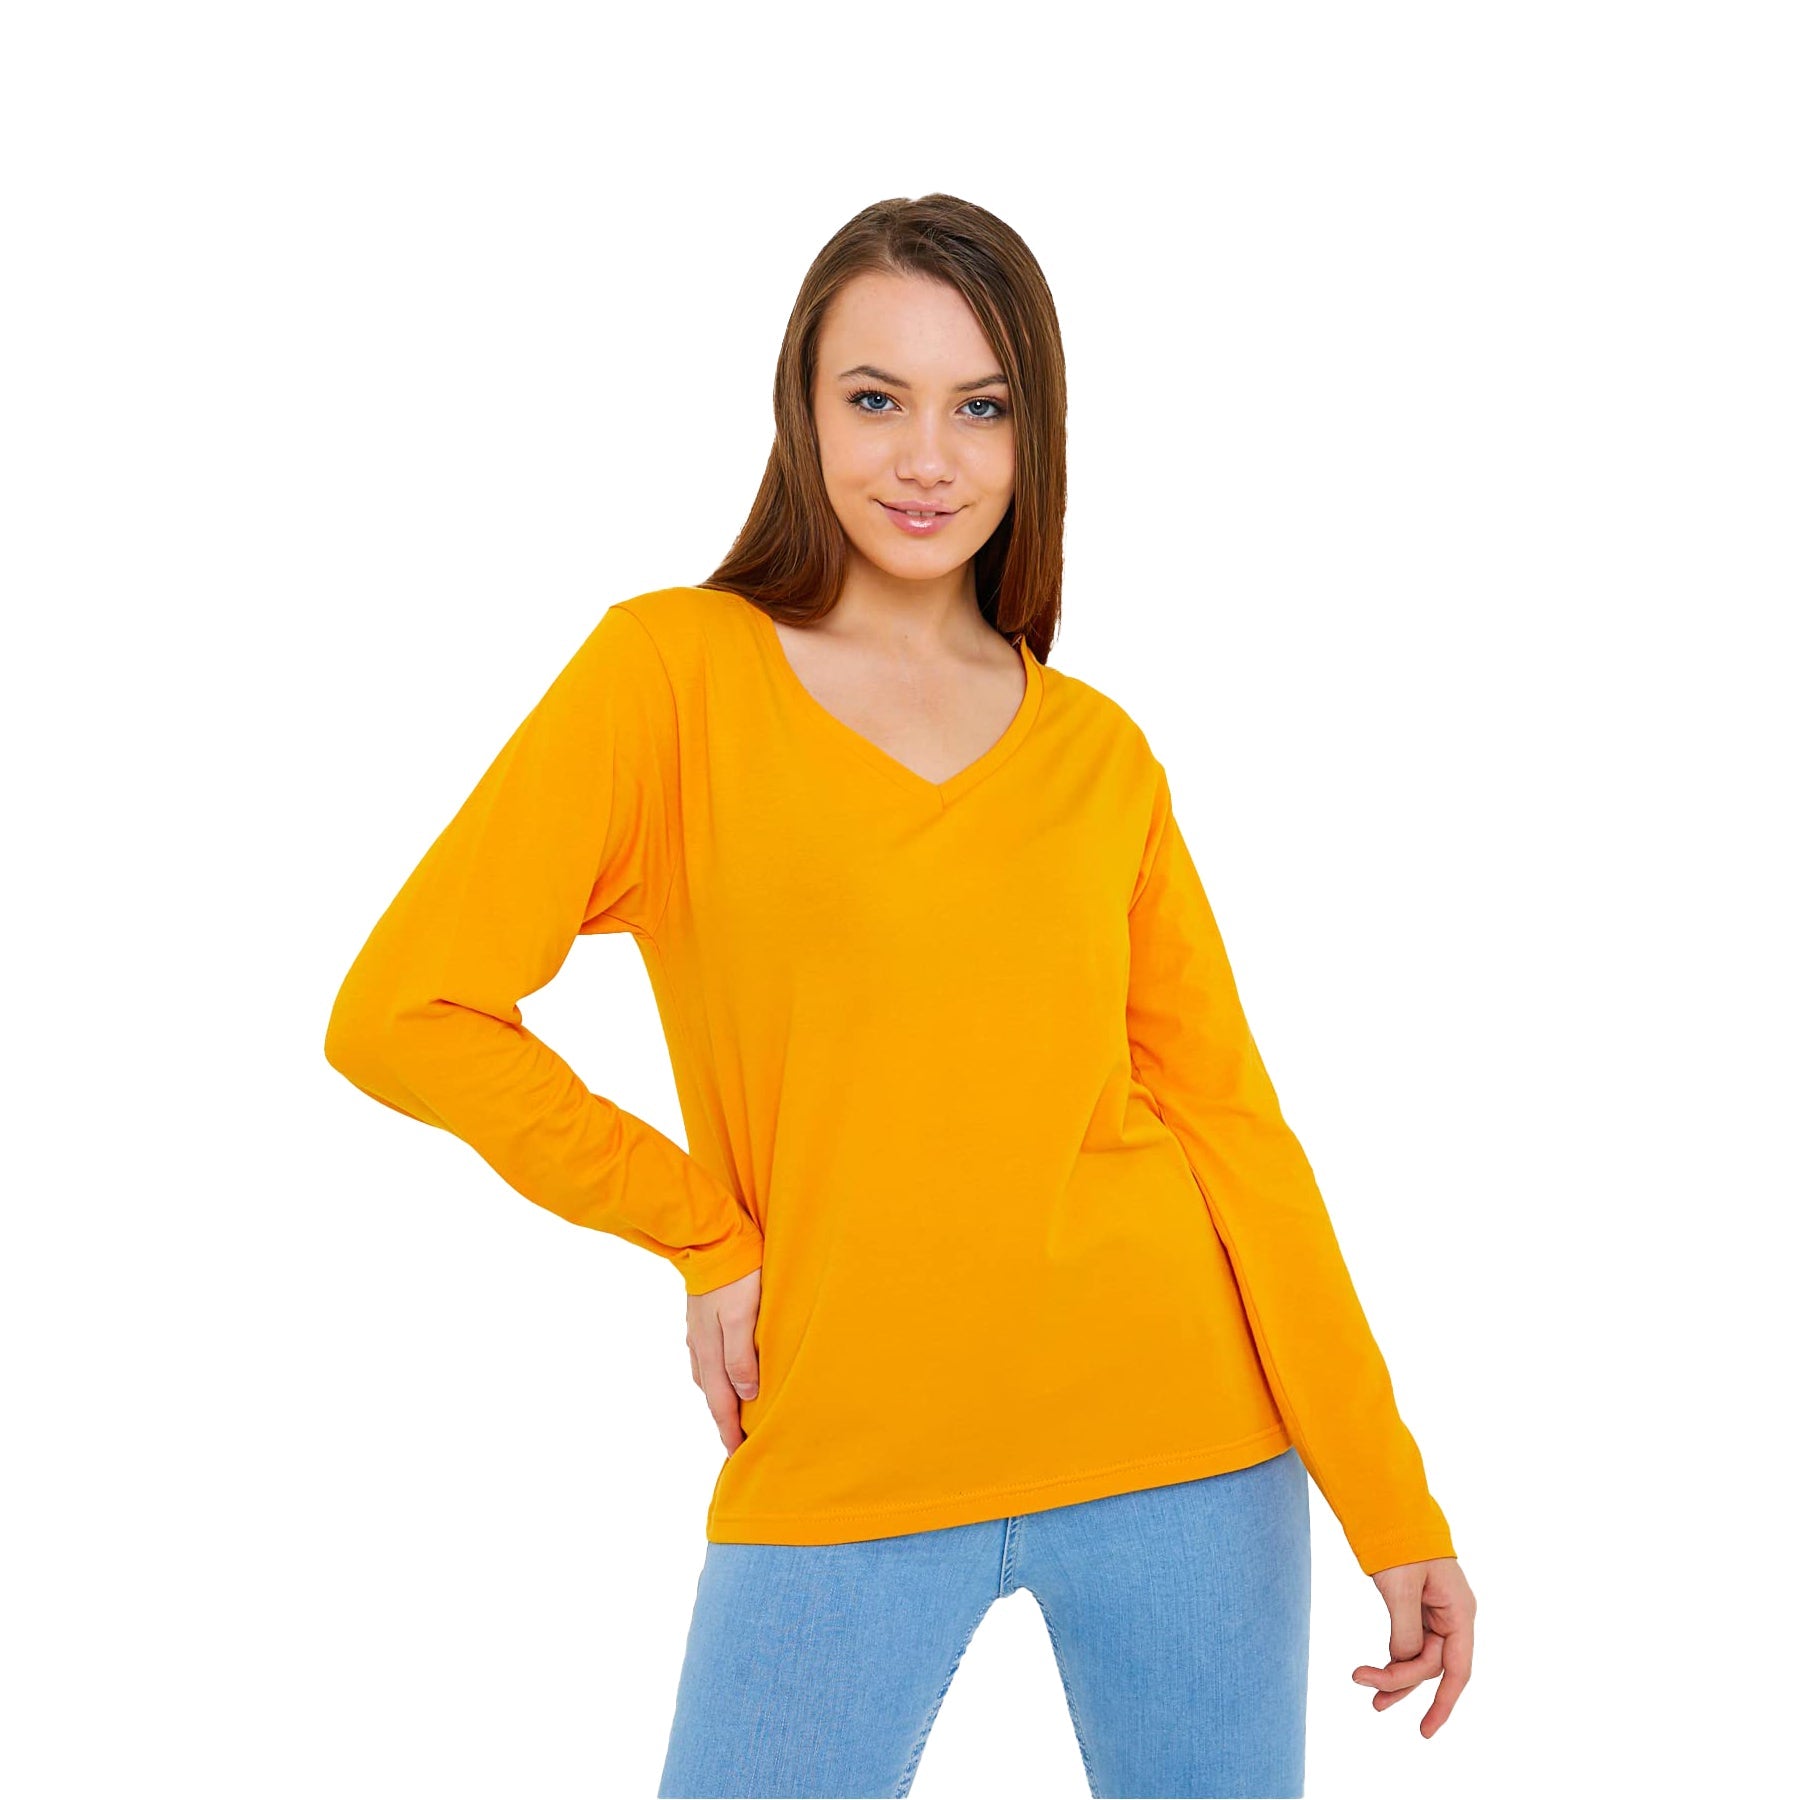 Buy butter-scotch Long Sleeve V-Neck Shirts for Women &amp; Girls - Colorful Pima Cotton